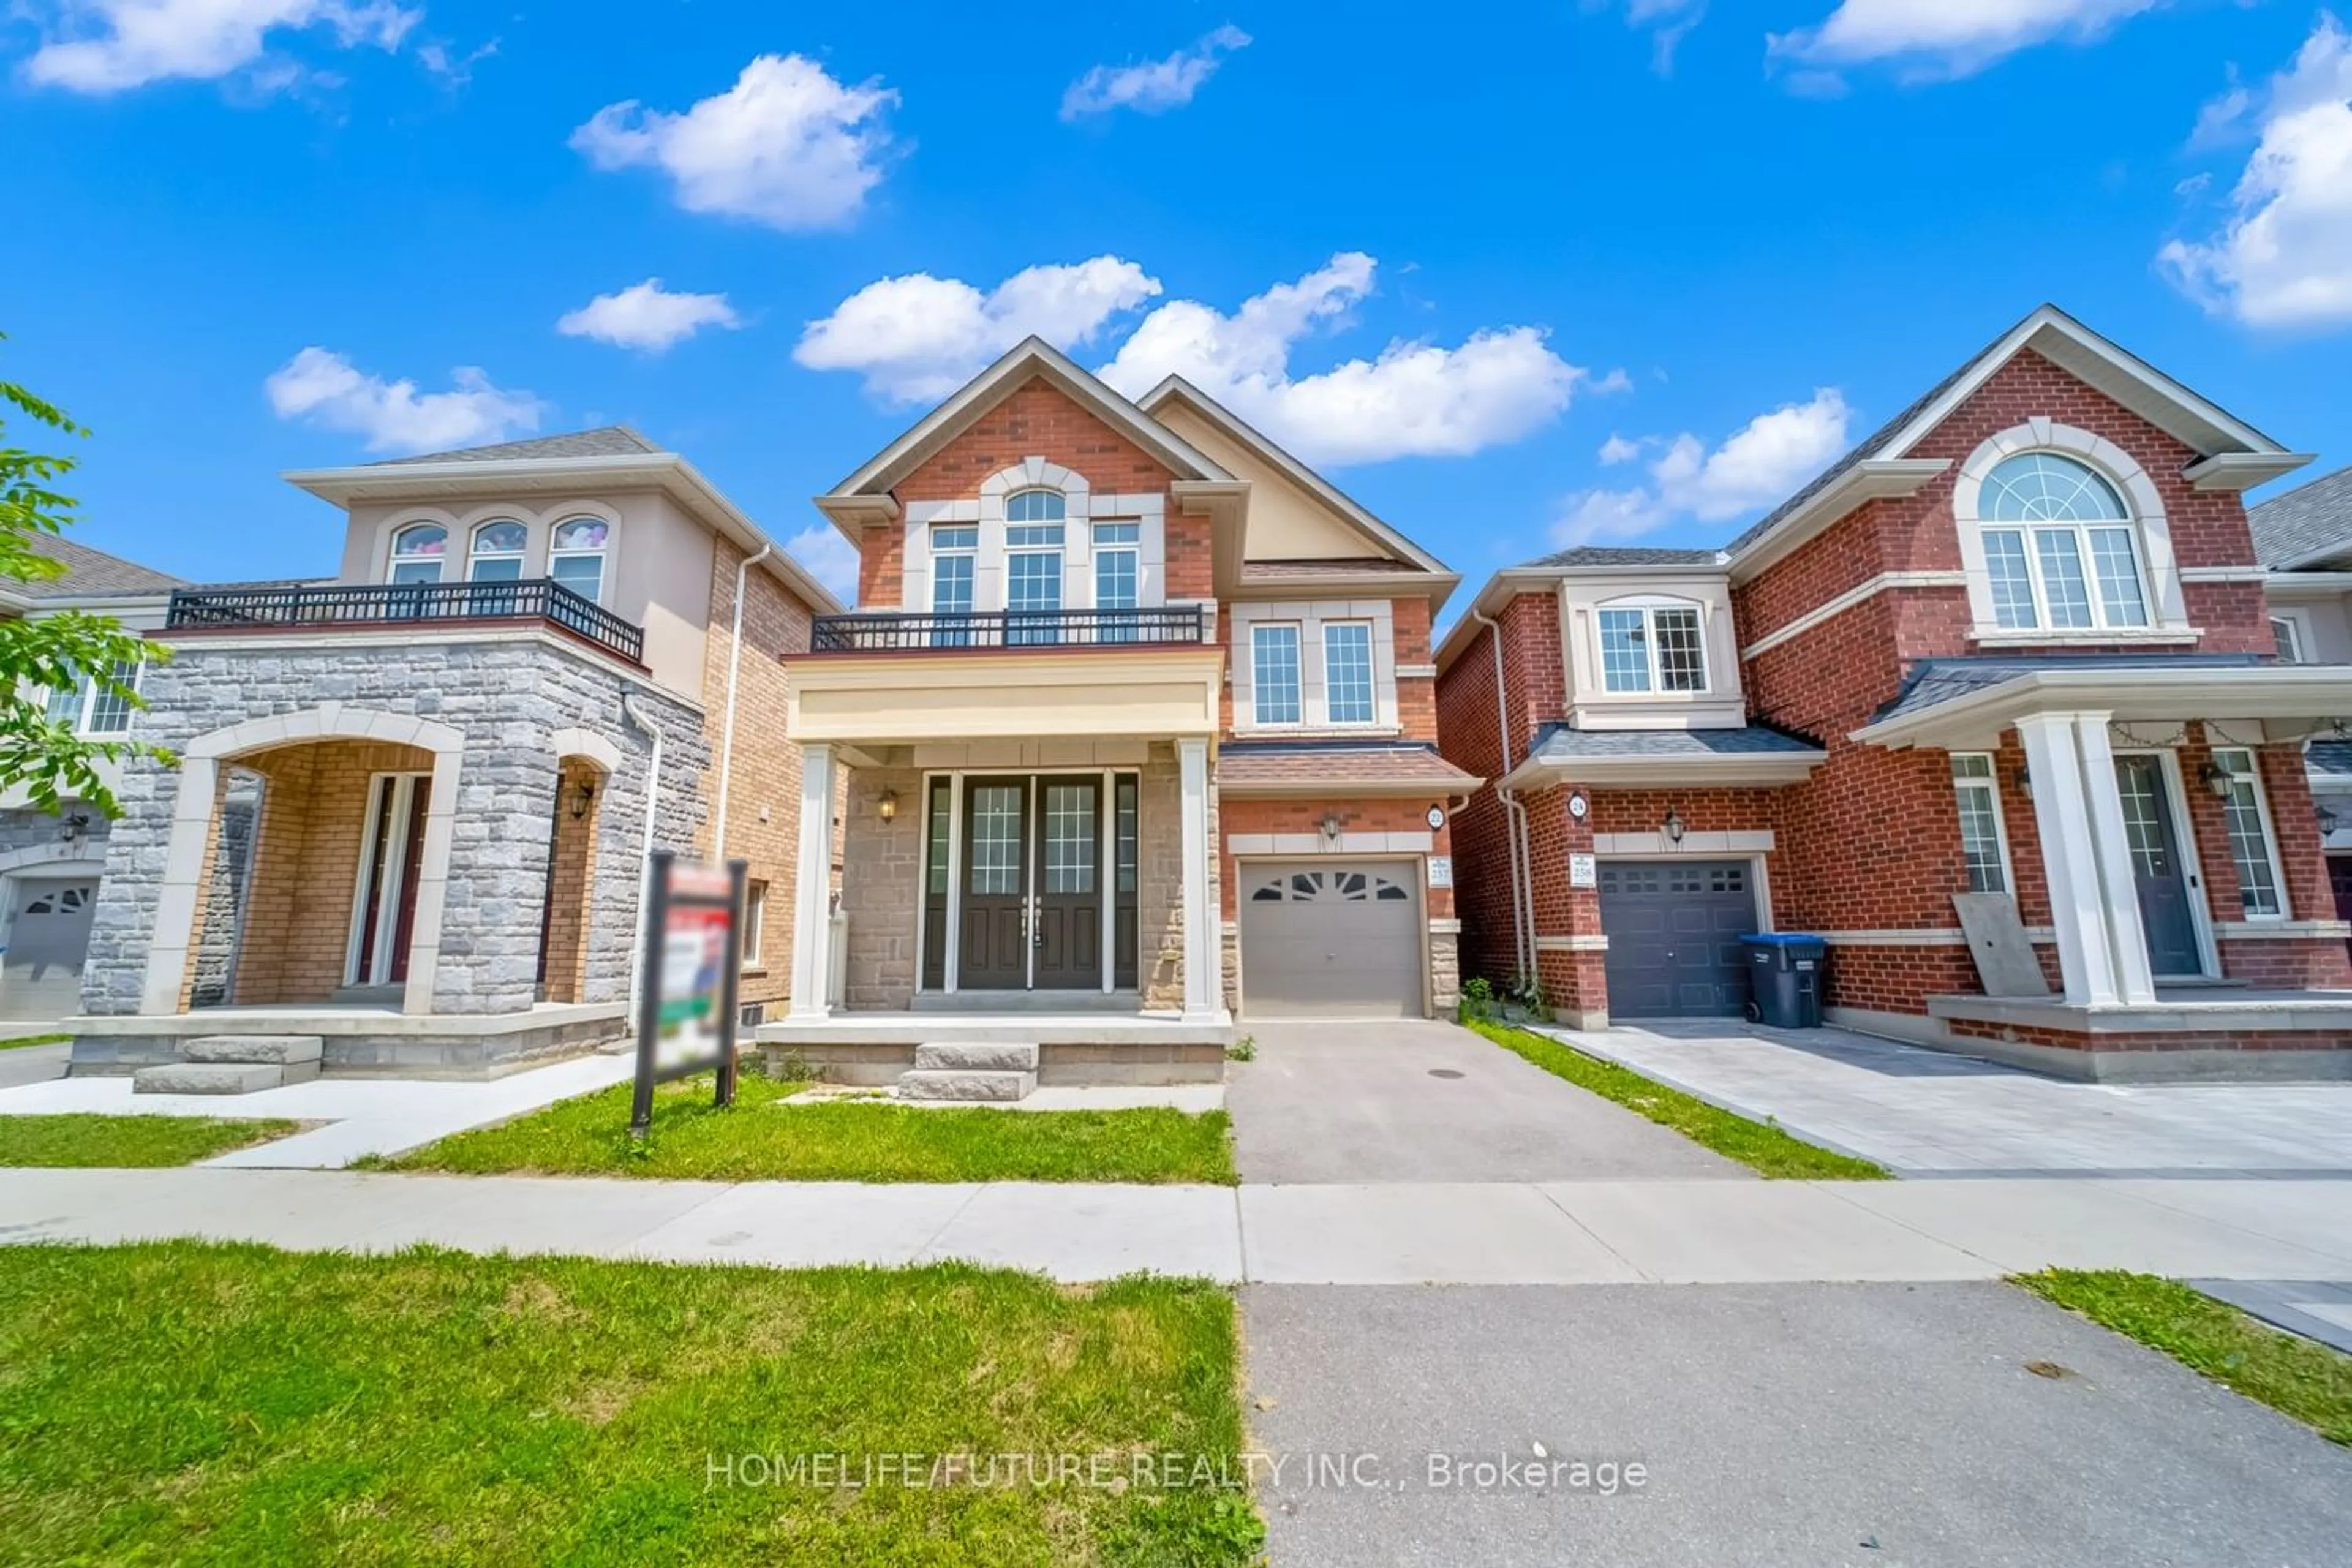 Home with brick exterior material for 22 Pearman Cres, Brampton Ontario L7A 4Y8